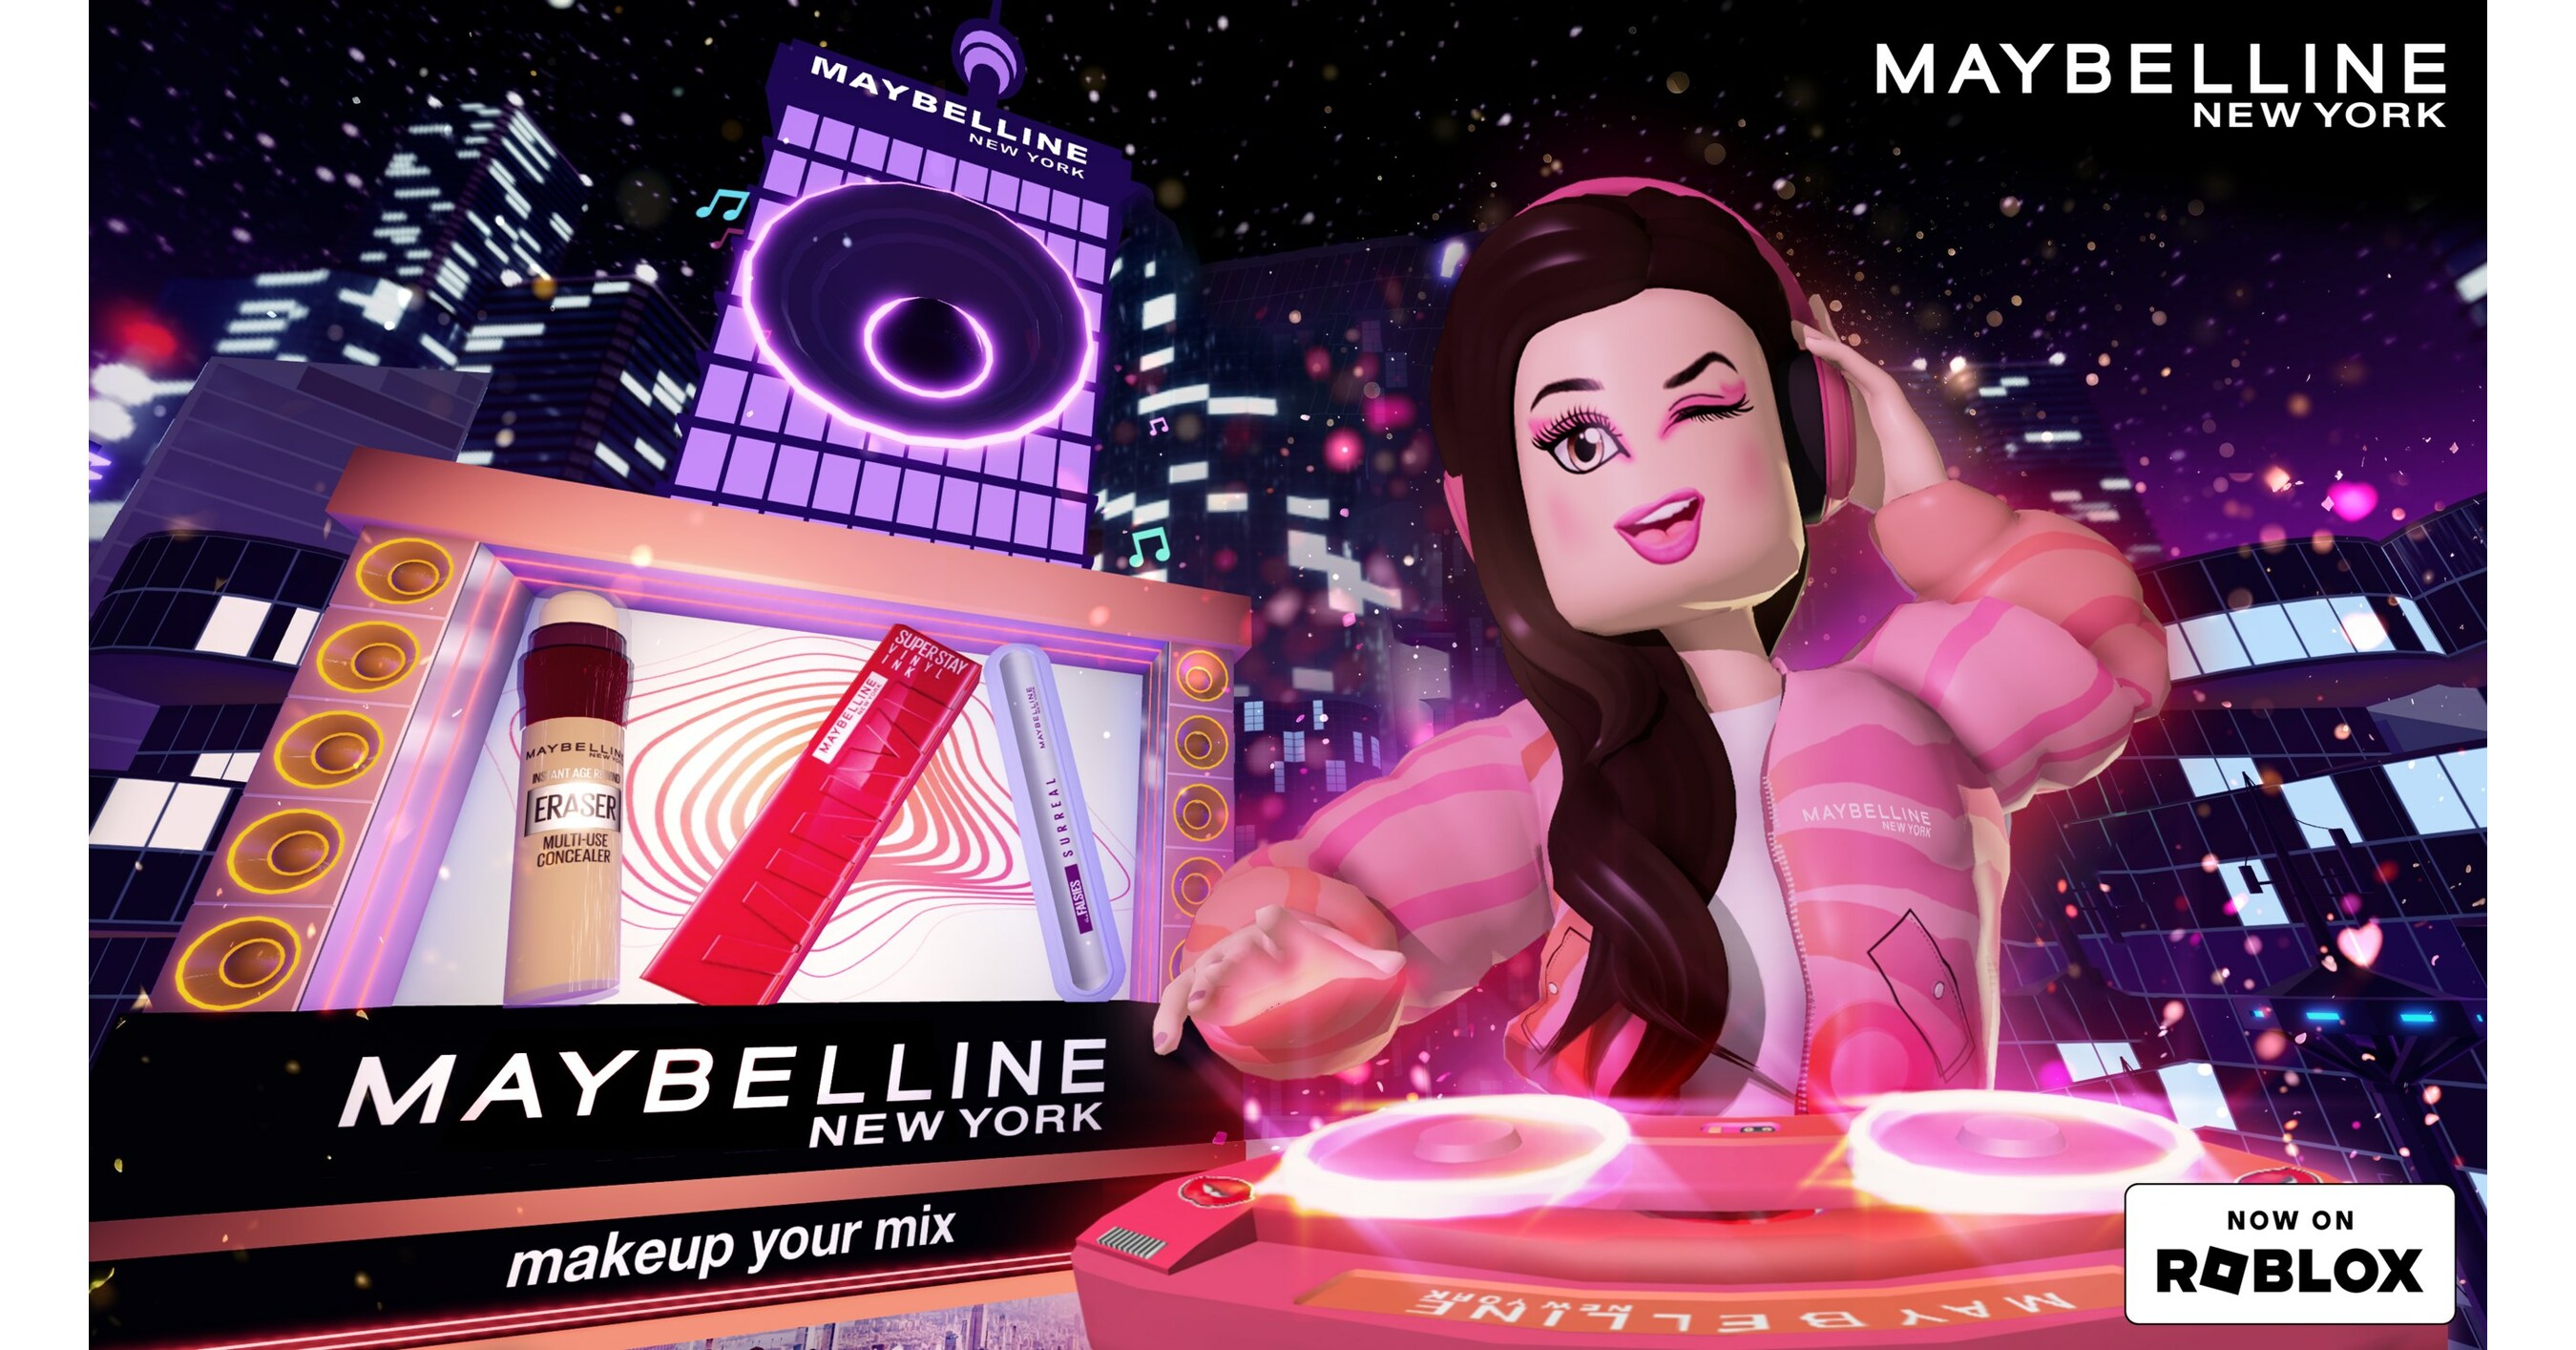 Maybelline New York Makes a Splash in Roblox: A Digital Makeup and